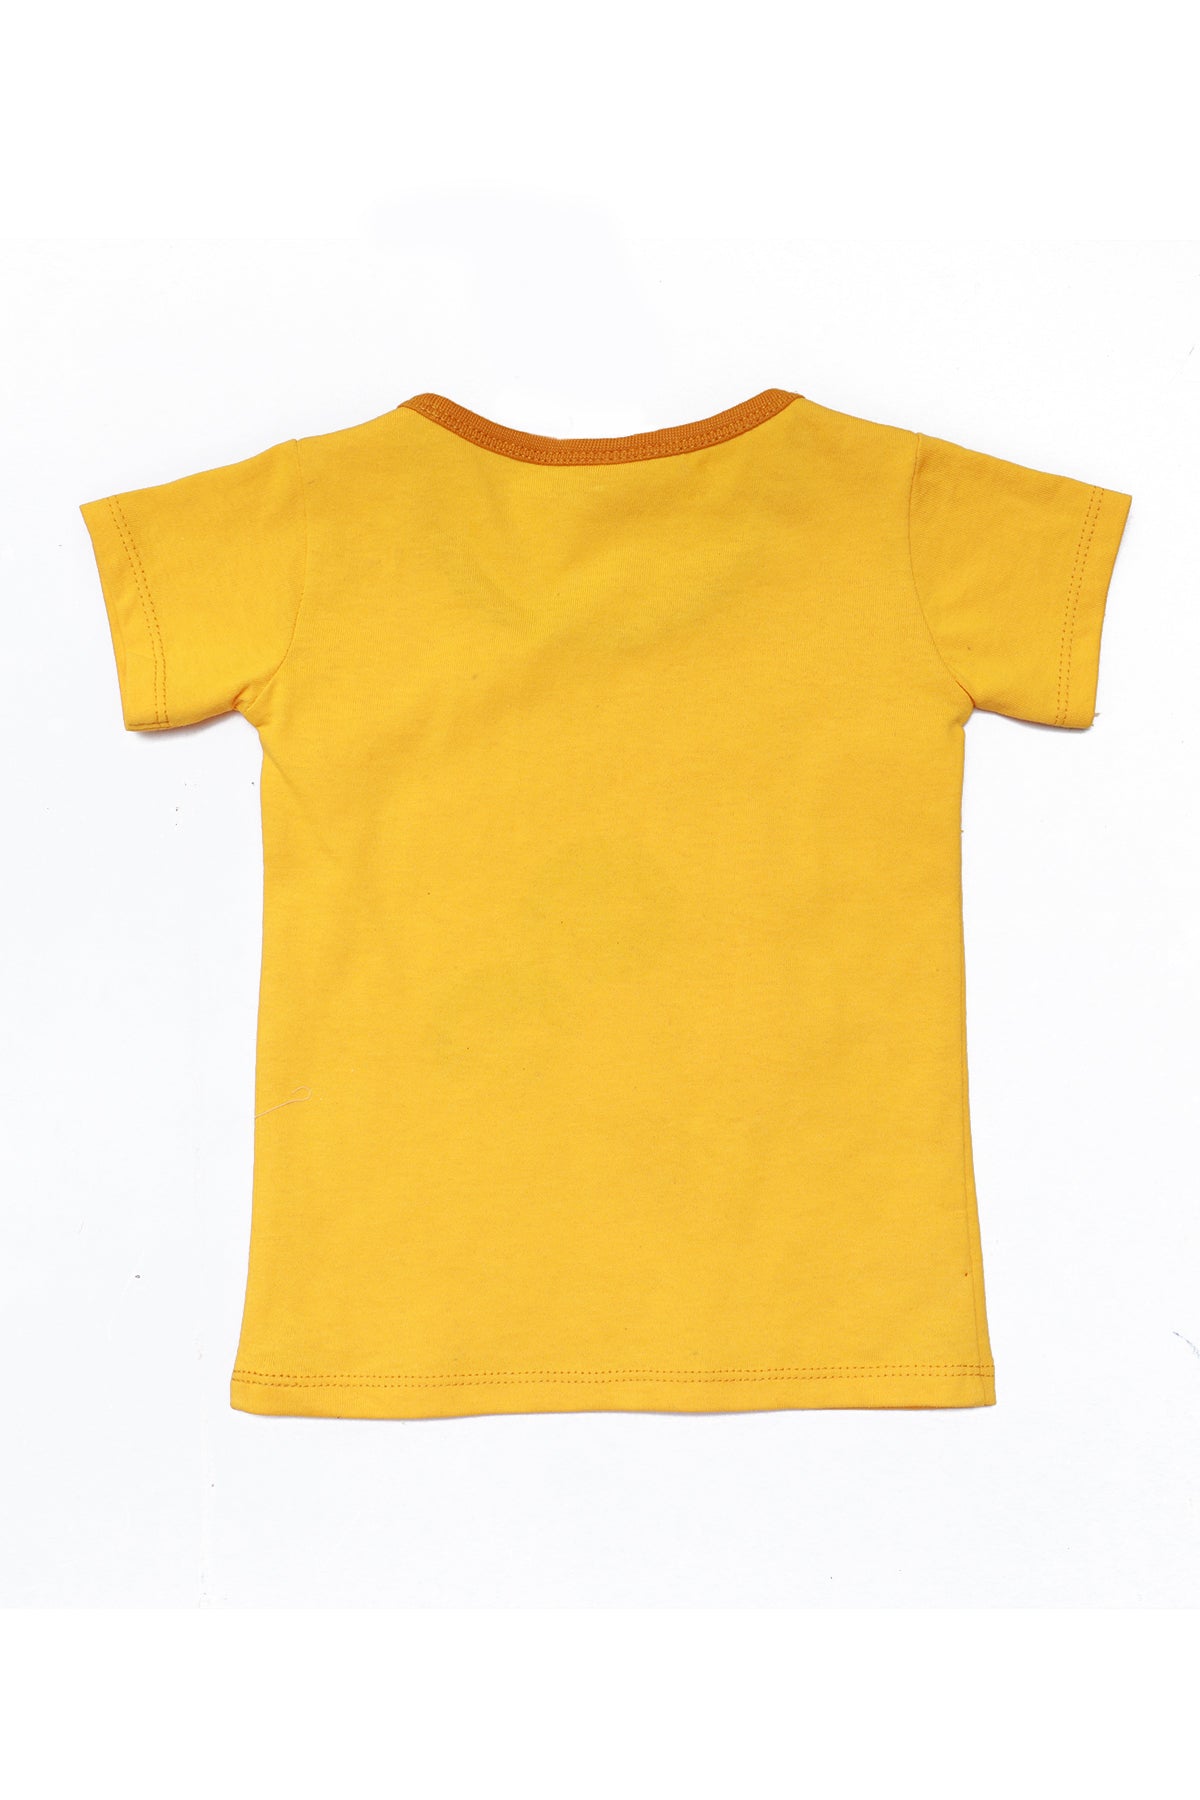 OZONE Baby Girls Casual Top